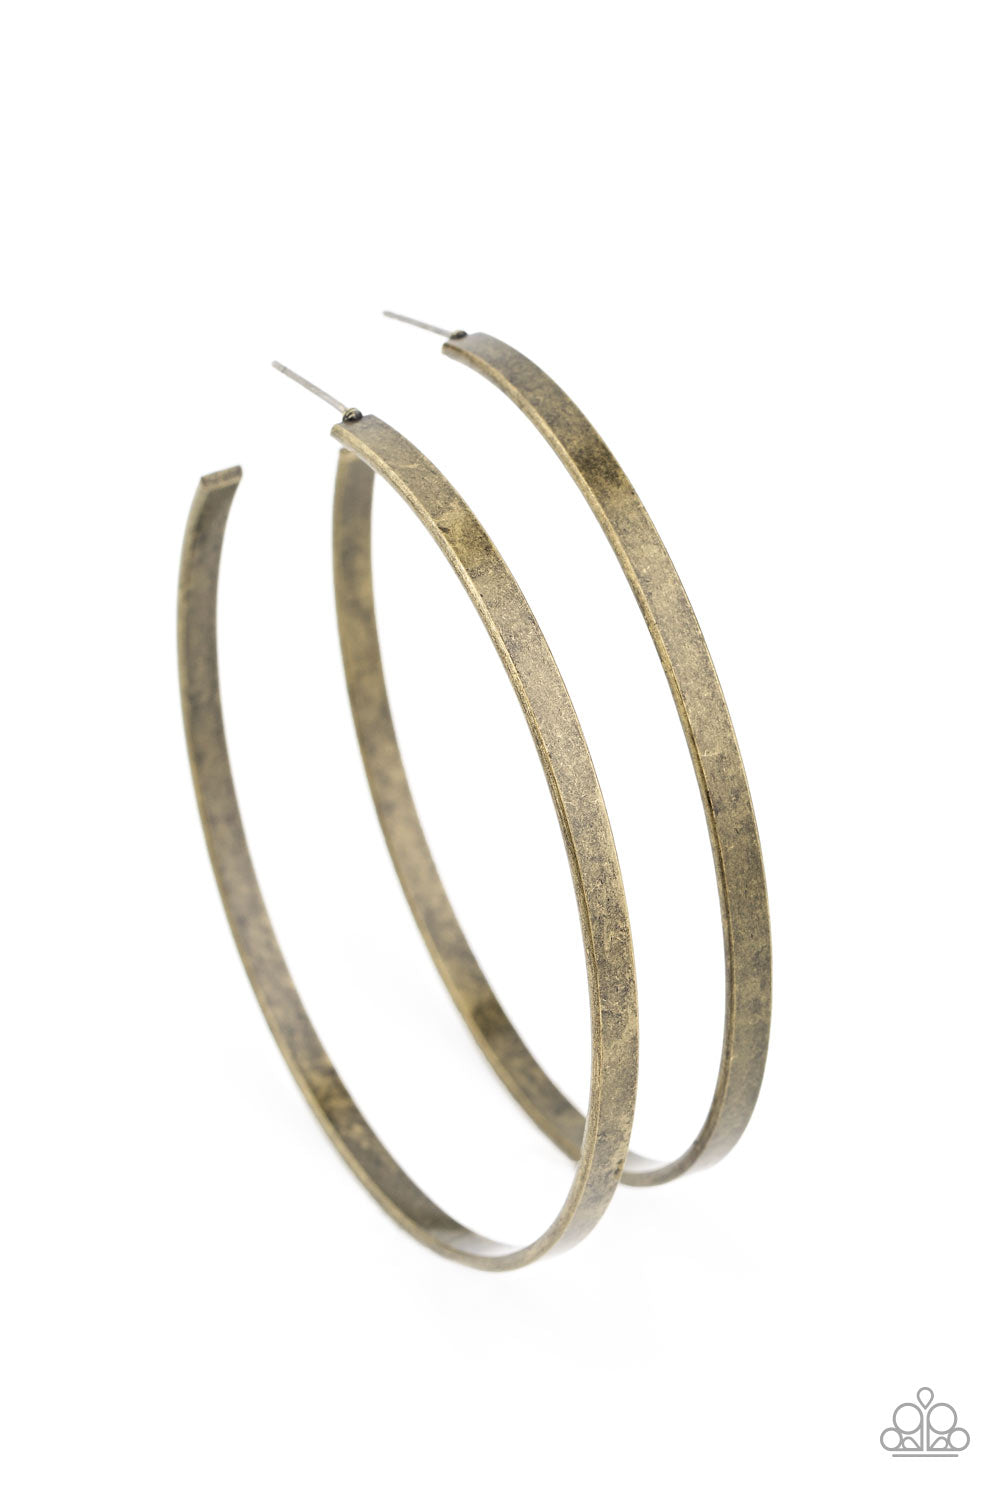 Lean Into The Curves Earrings - Brass